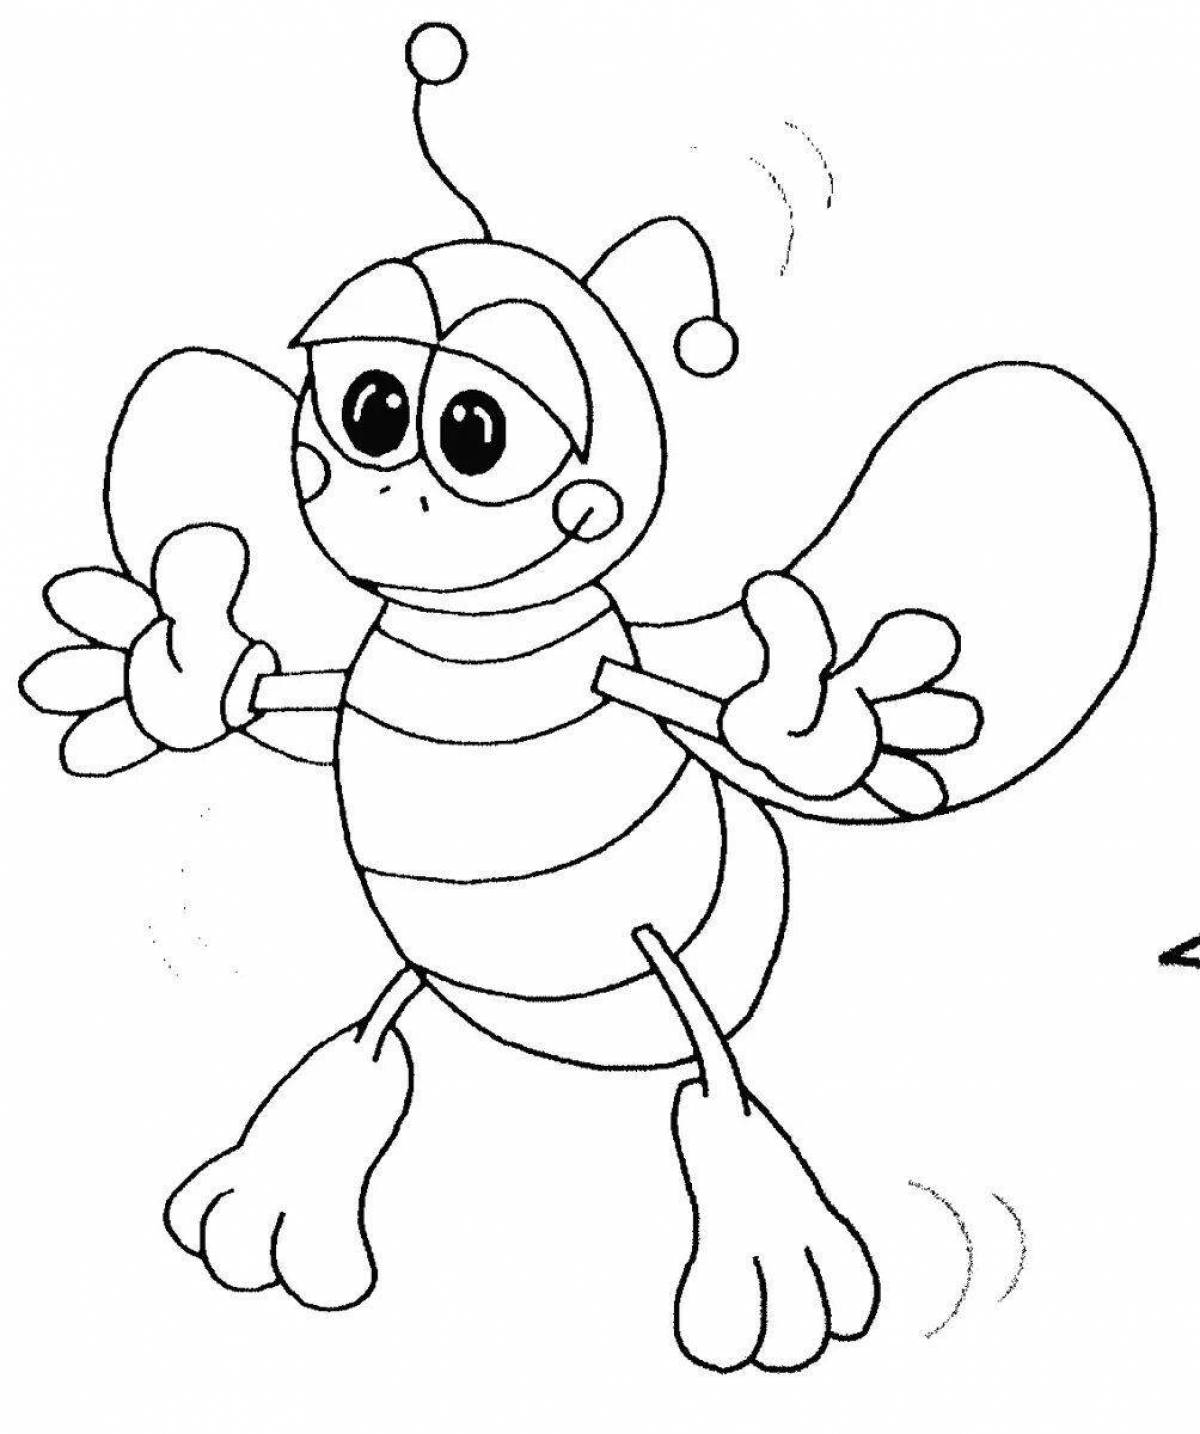 Coloring page adorable cat and bee